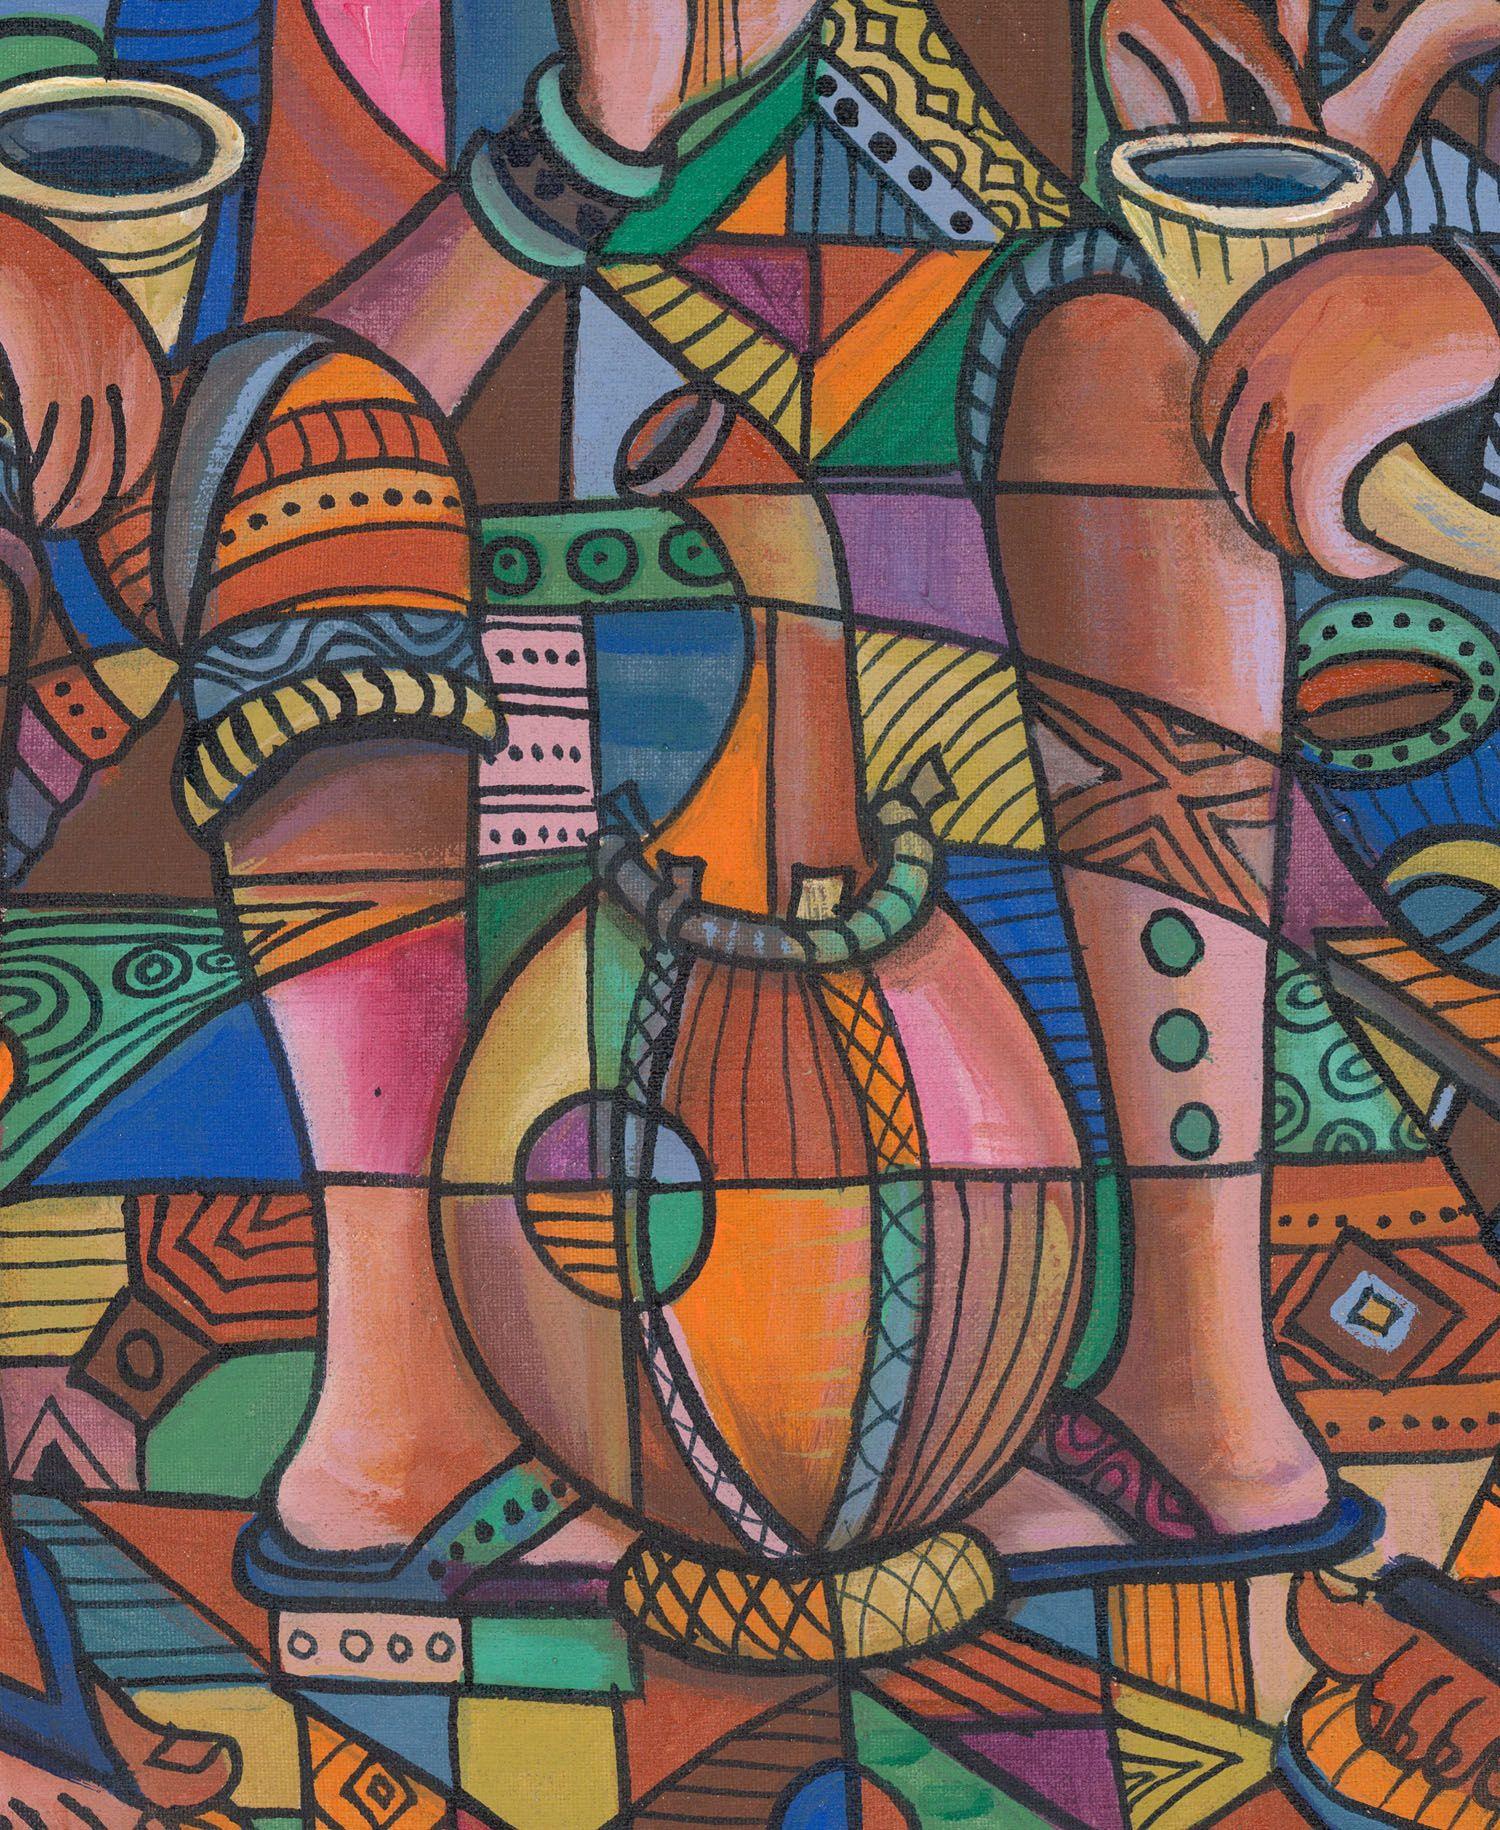 Cameroon artist Angu Walters likes to paint his idealized vision of traditional African village life. Here we see lifelong friends in conversation over drinks in a colorful tropical setting.  :: Painting :: Cubism :: This piece comes with an